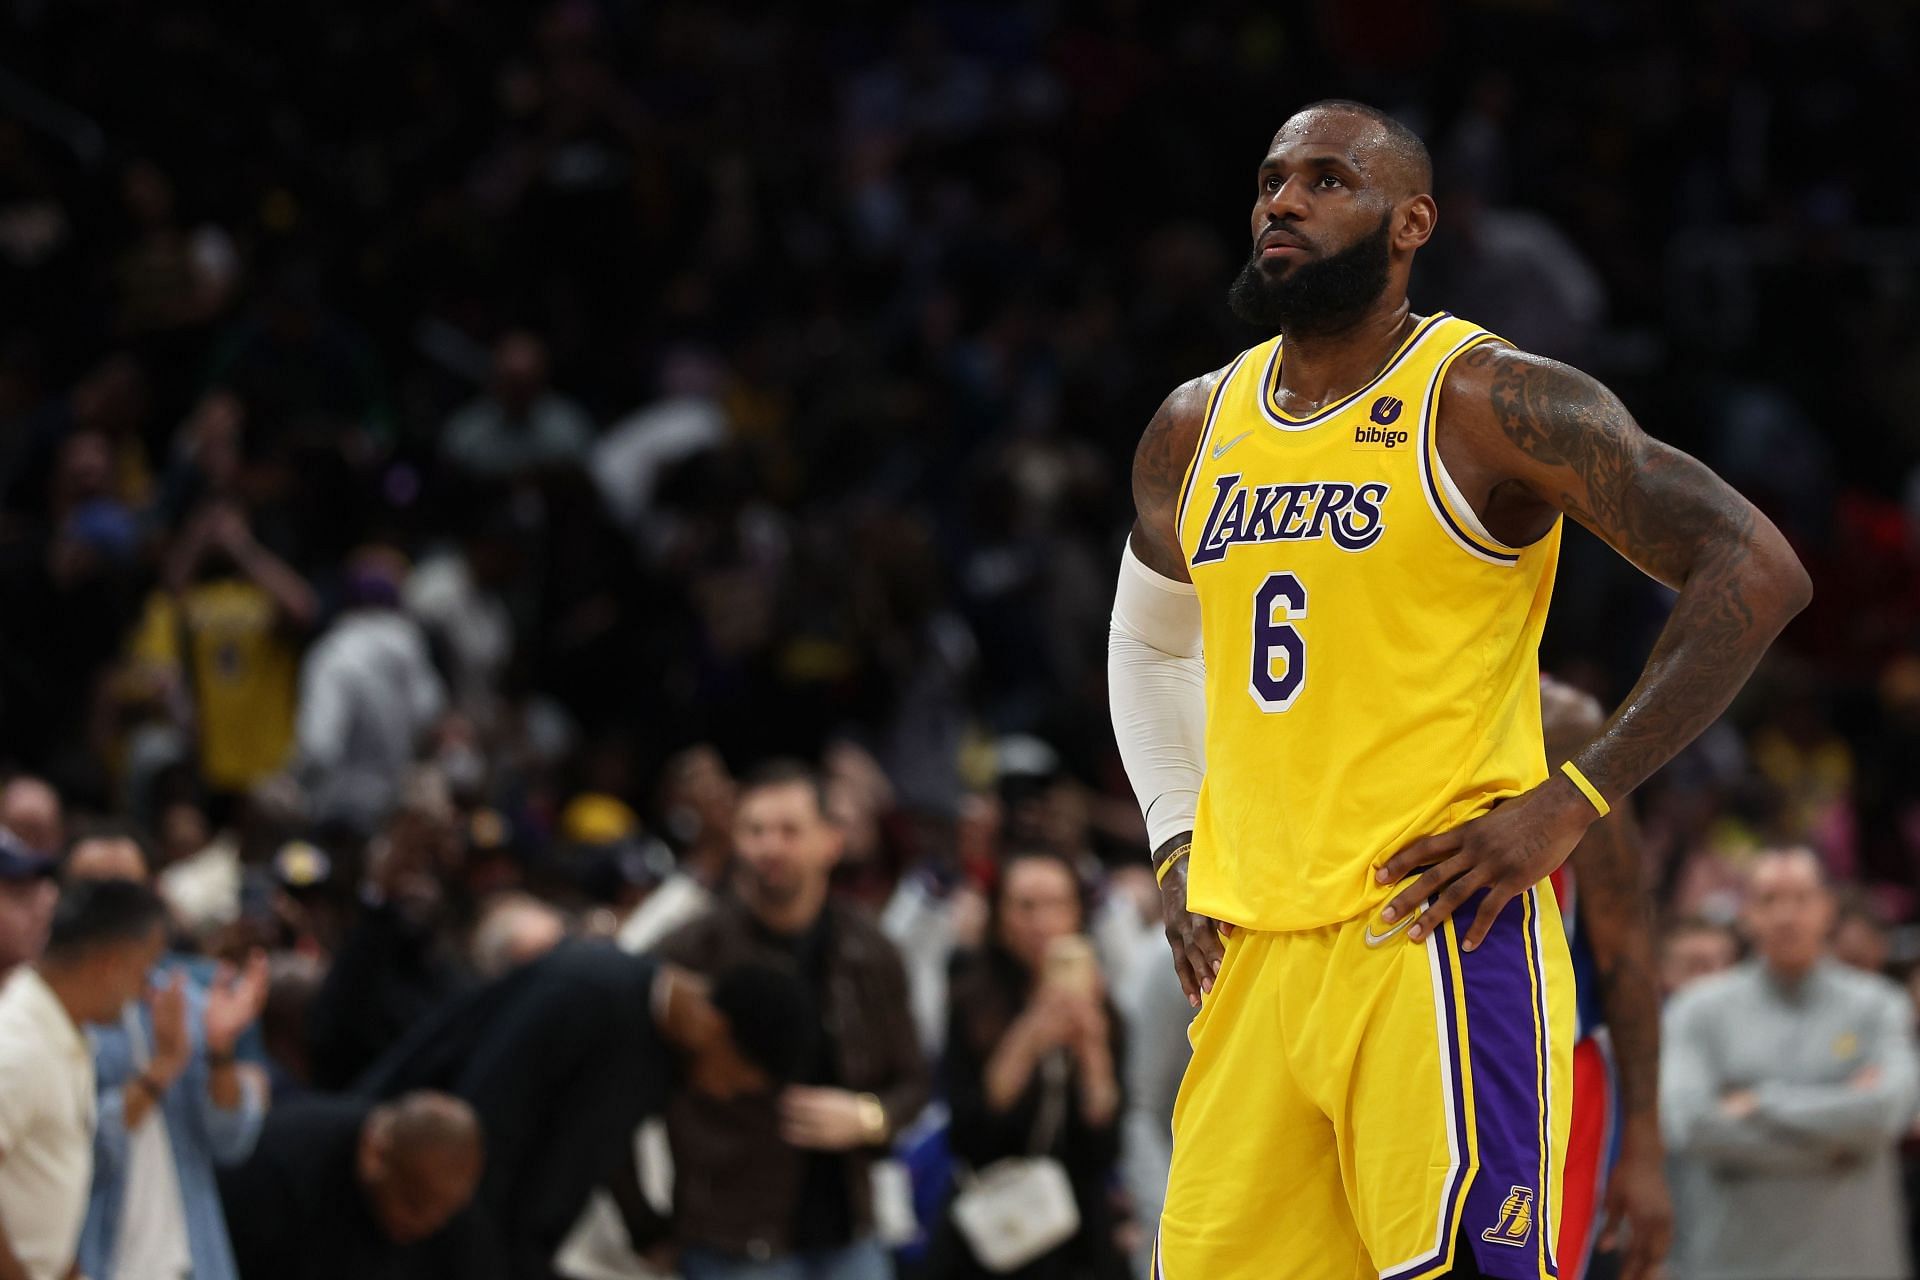 LeBron James in action during Los Angeles Lakers v Washington Wizards